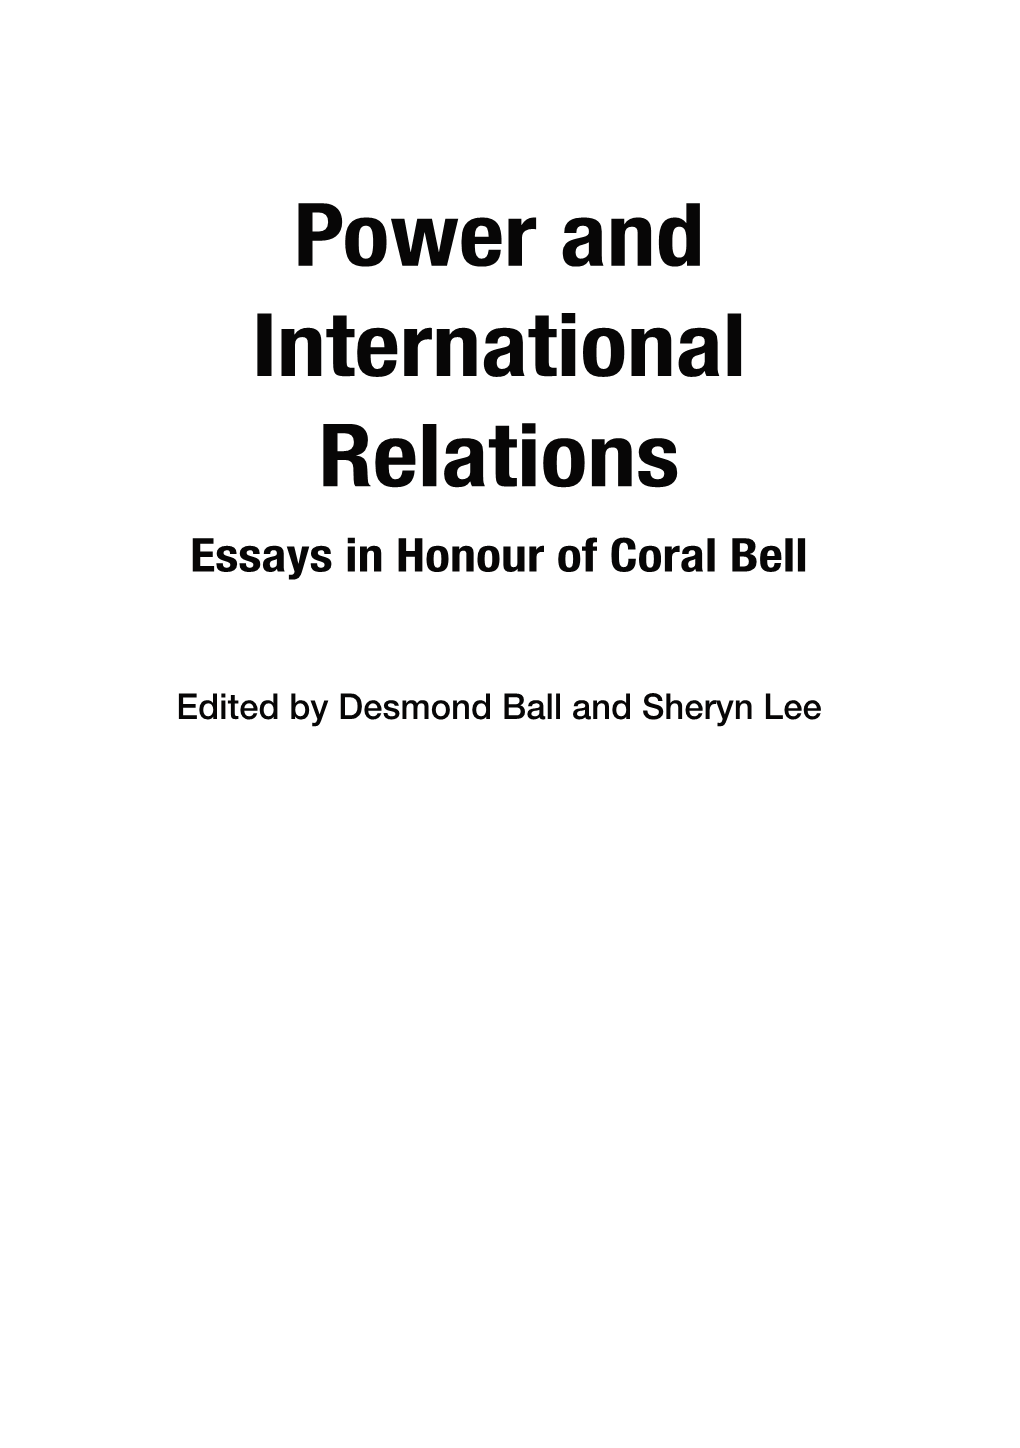 Power and International Relations Essays in Honour of Coral Bell